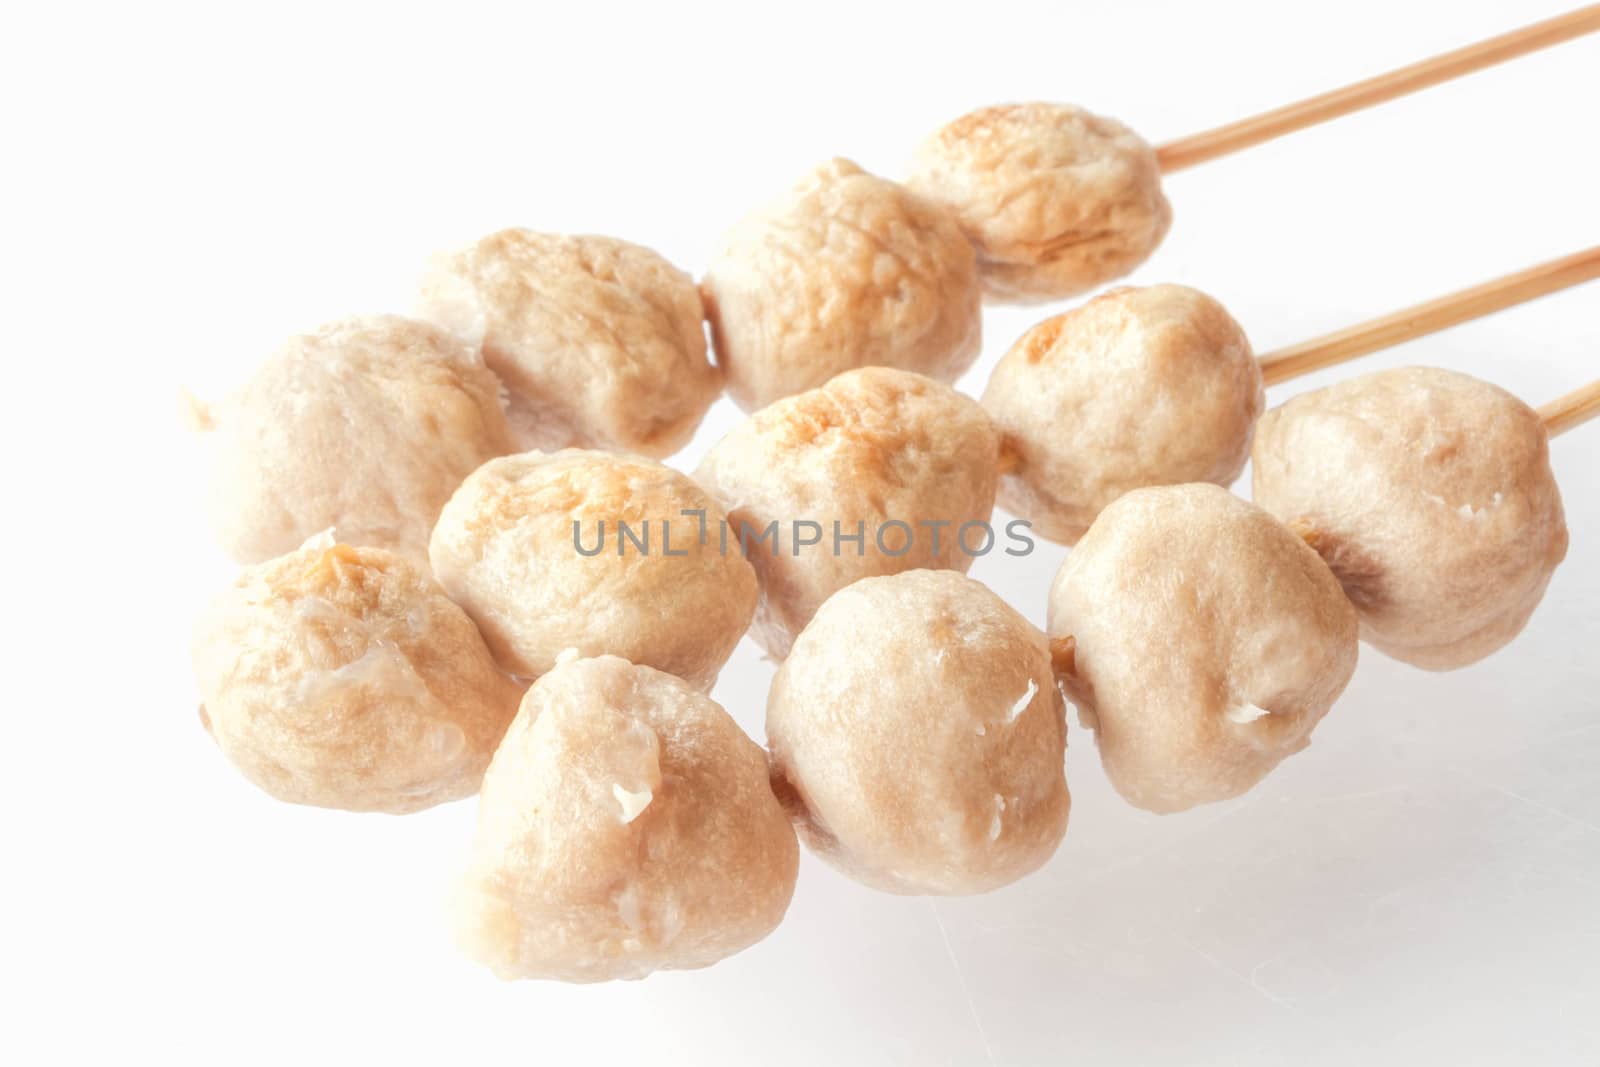 Mini pork balls in wood stick on clean table by punsayaporn